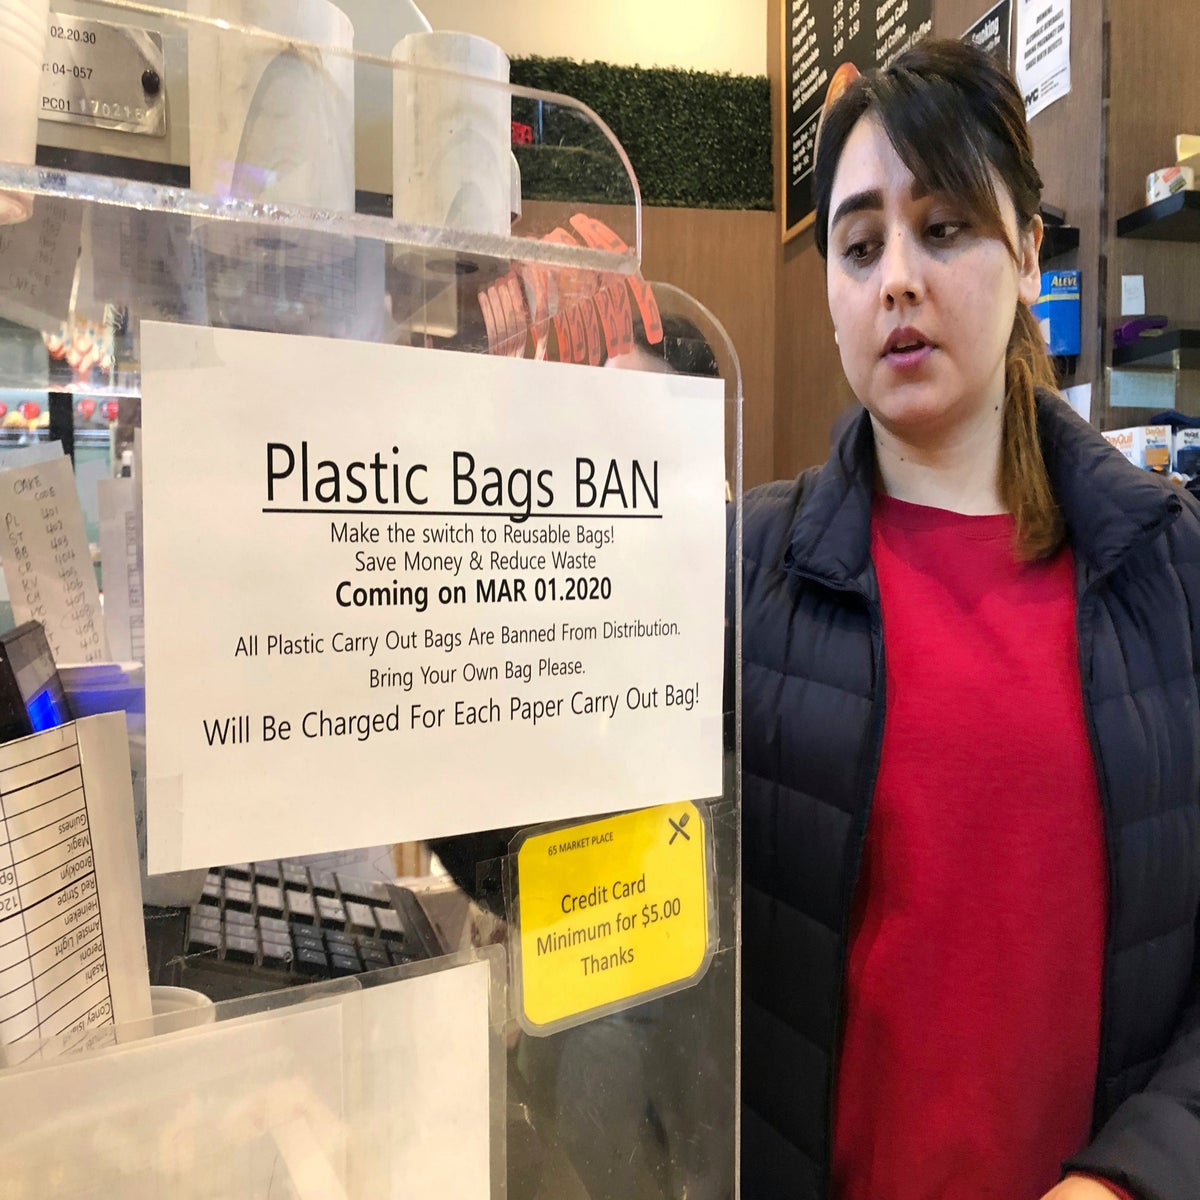 How Banning Plastic Bags Could Help New York Mitigate Climate Change